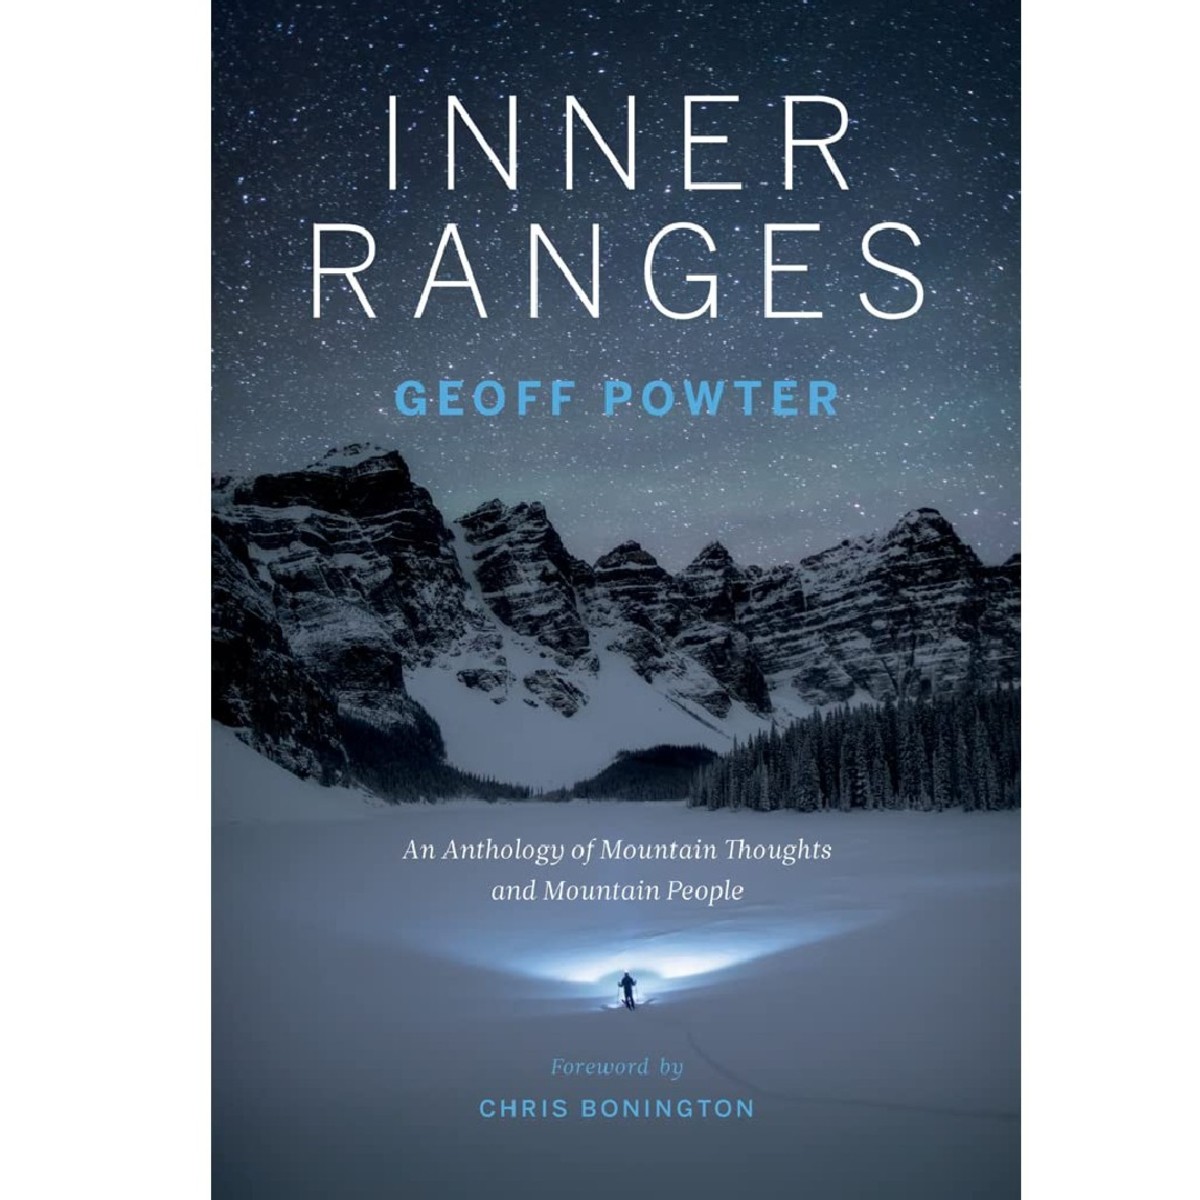 'Inner Ranges: An Anthology of Mountain Thoughts and Mountain People' by Geoff Powter